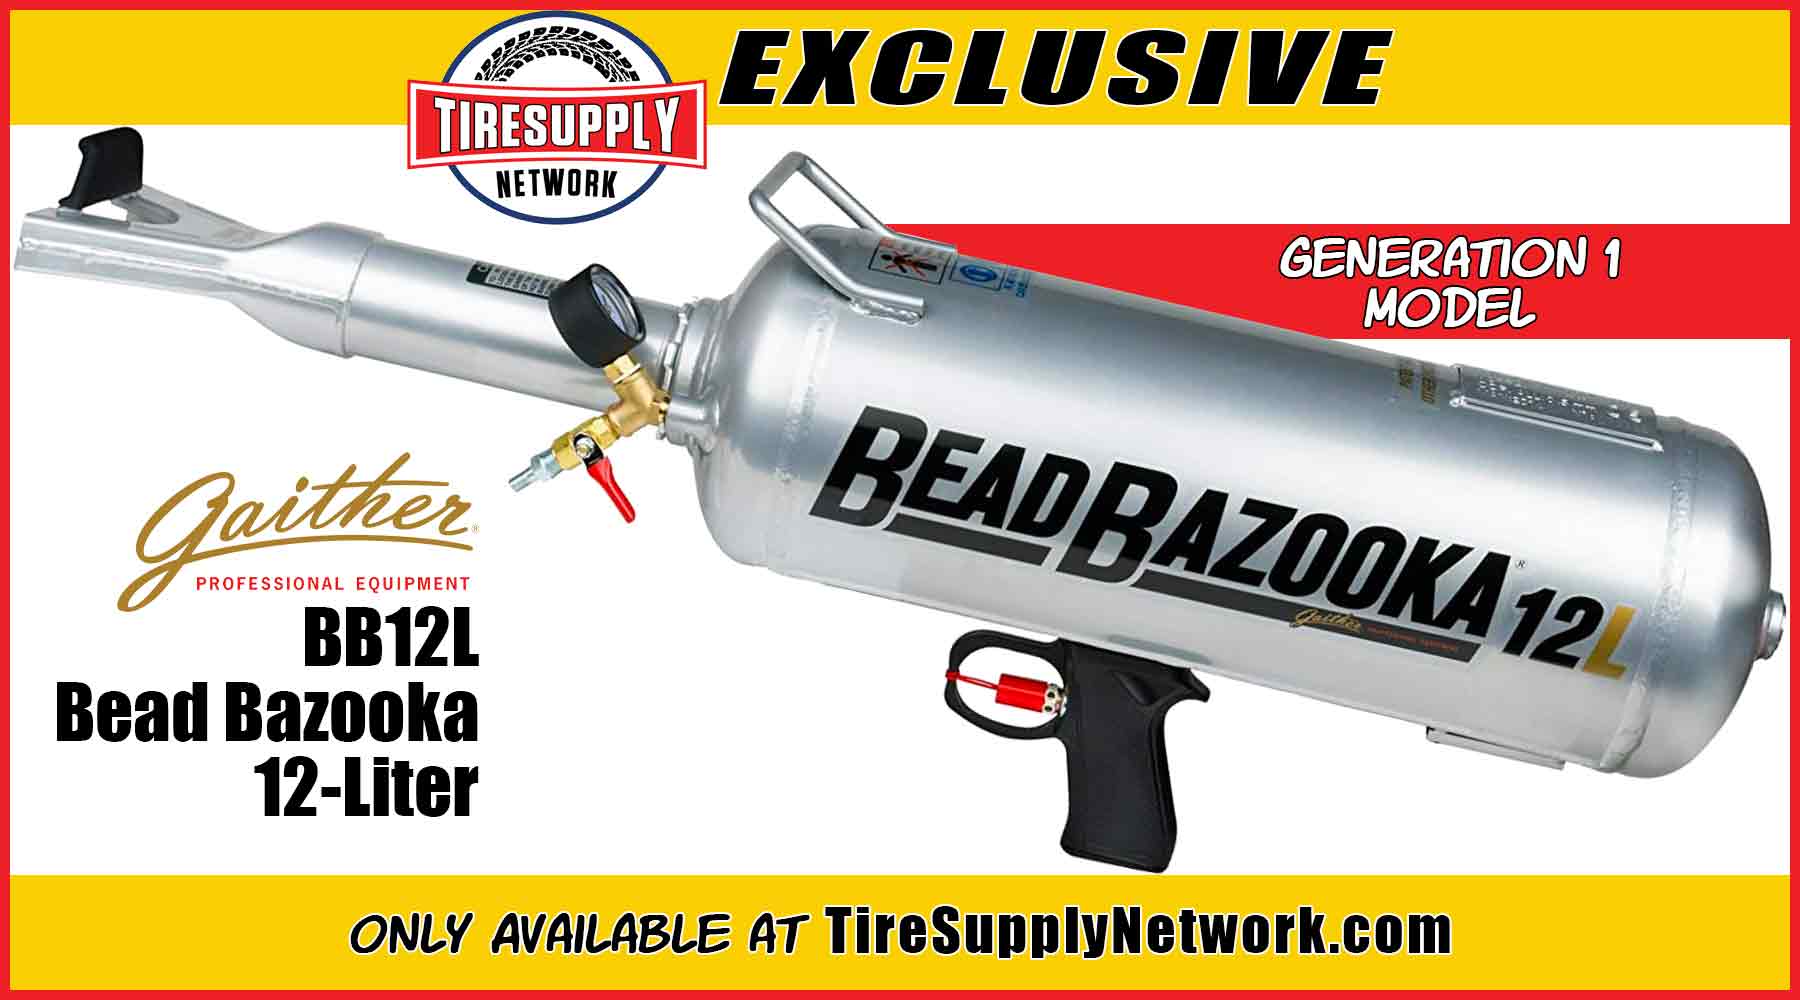 Gaither BB12L Trigger-Style 12-Liter Bead Bazooka - Tire Supply Network Exclusive!